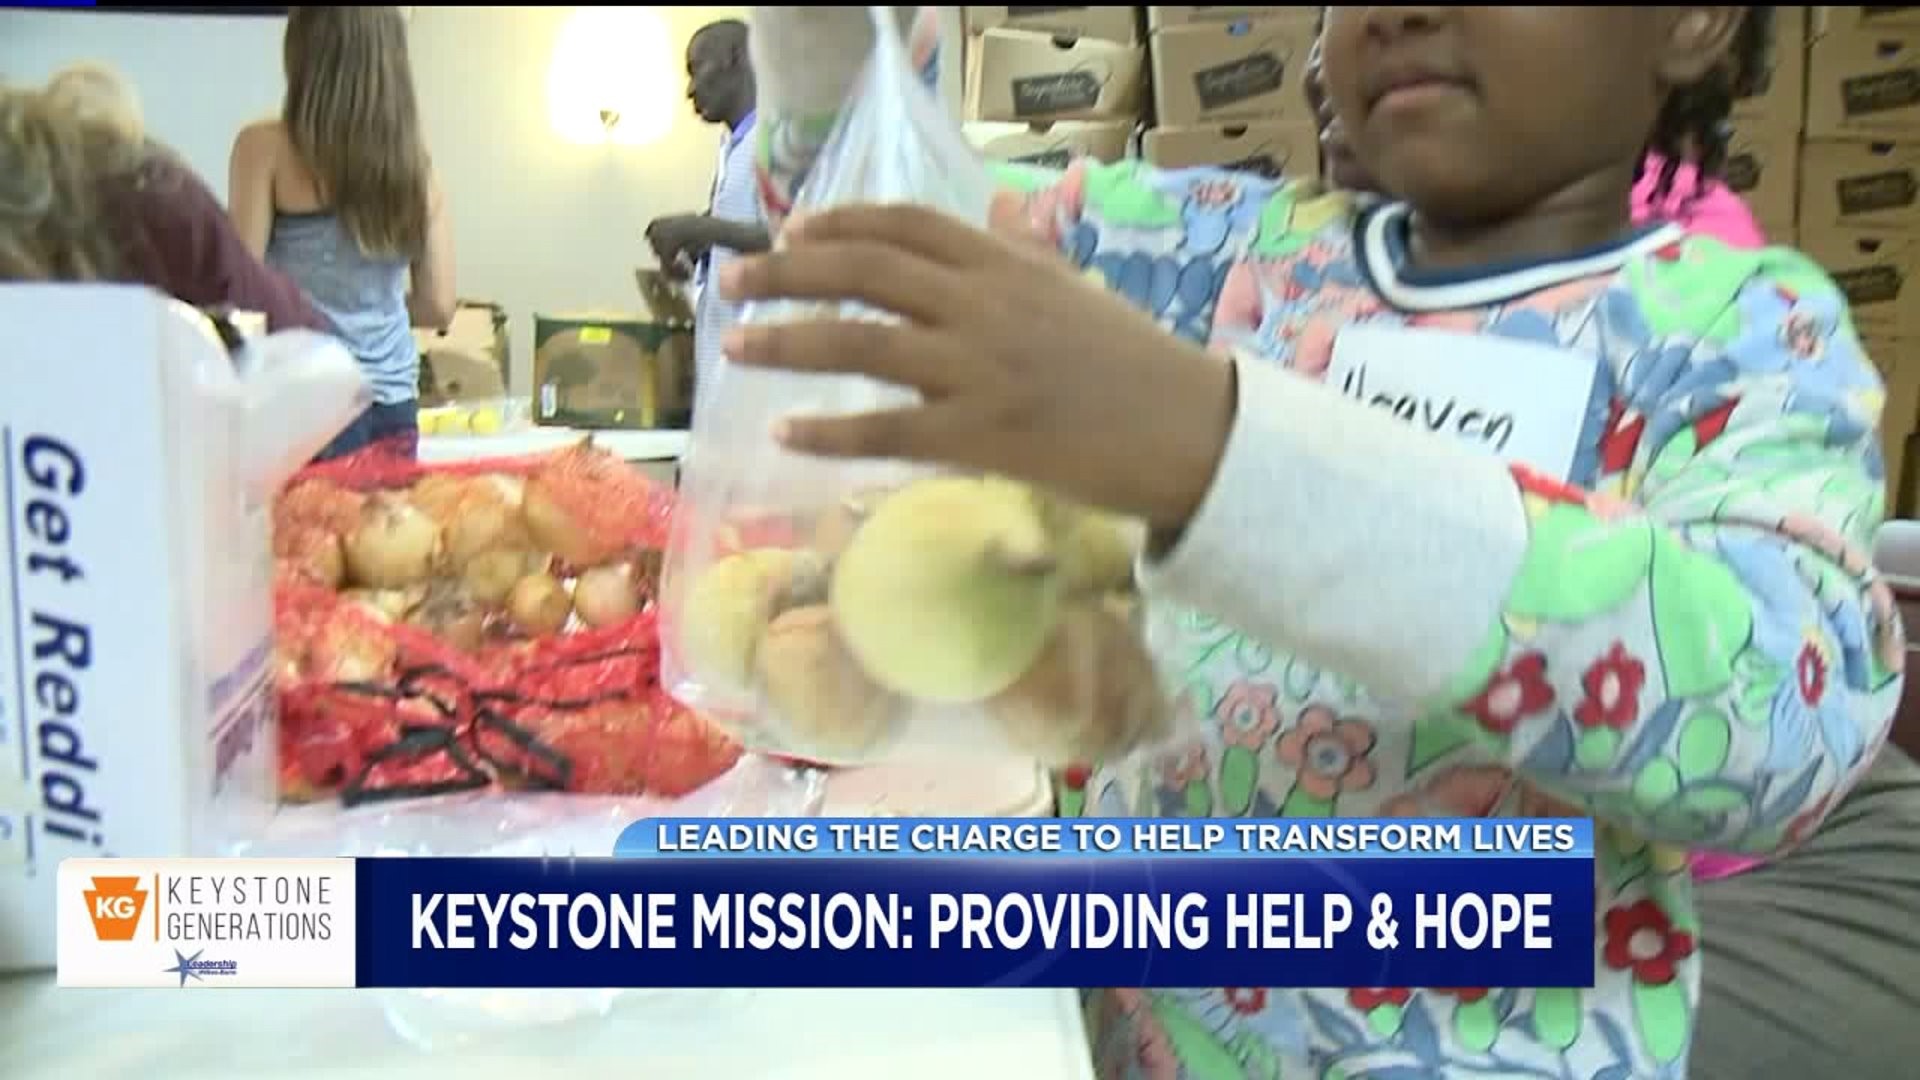 Providing Help & Hope: Leadership Wilkes-Barre Launches Project to Help Keystone Mission